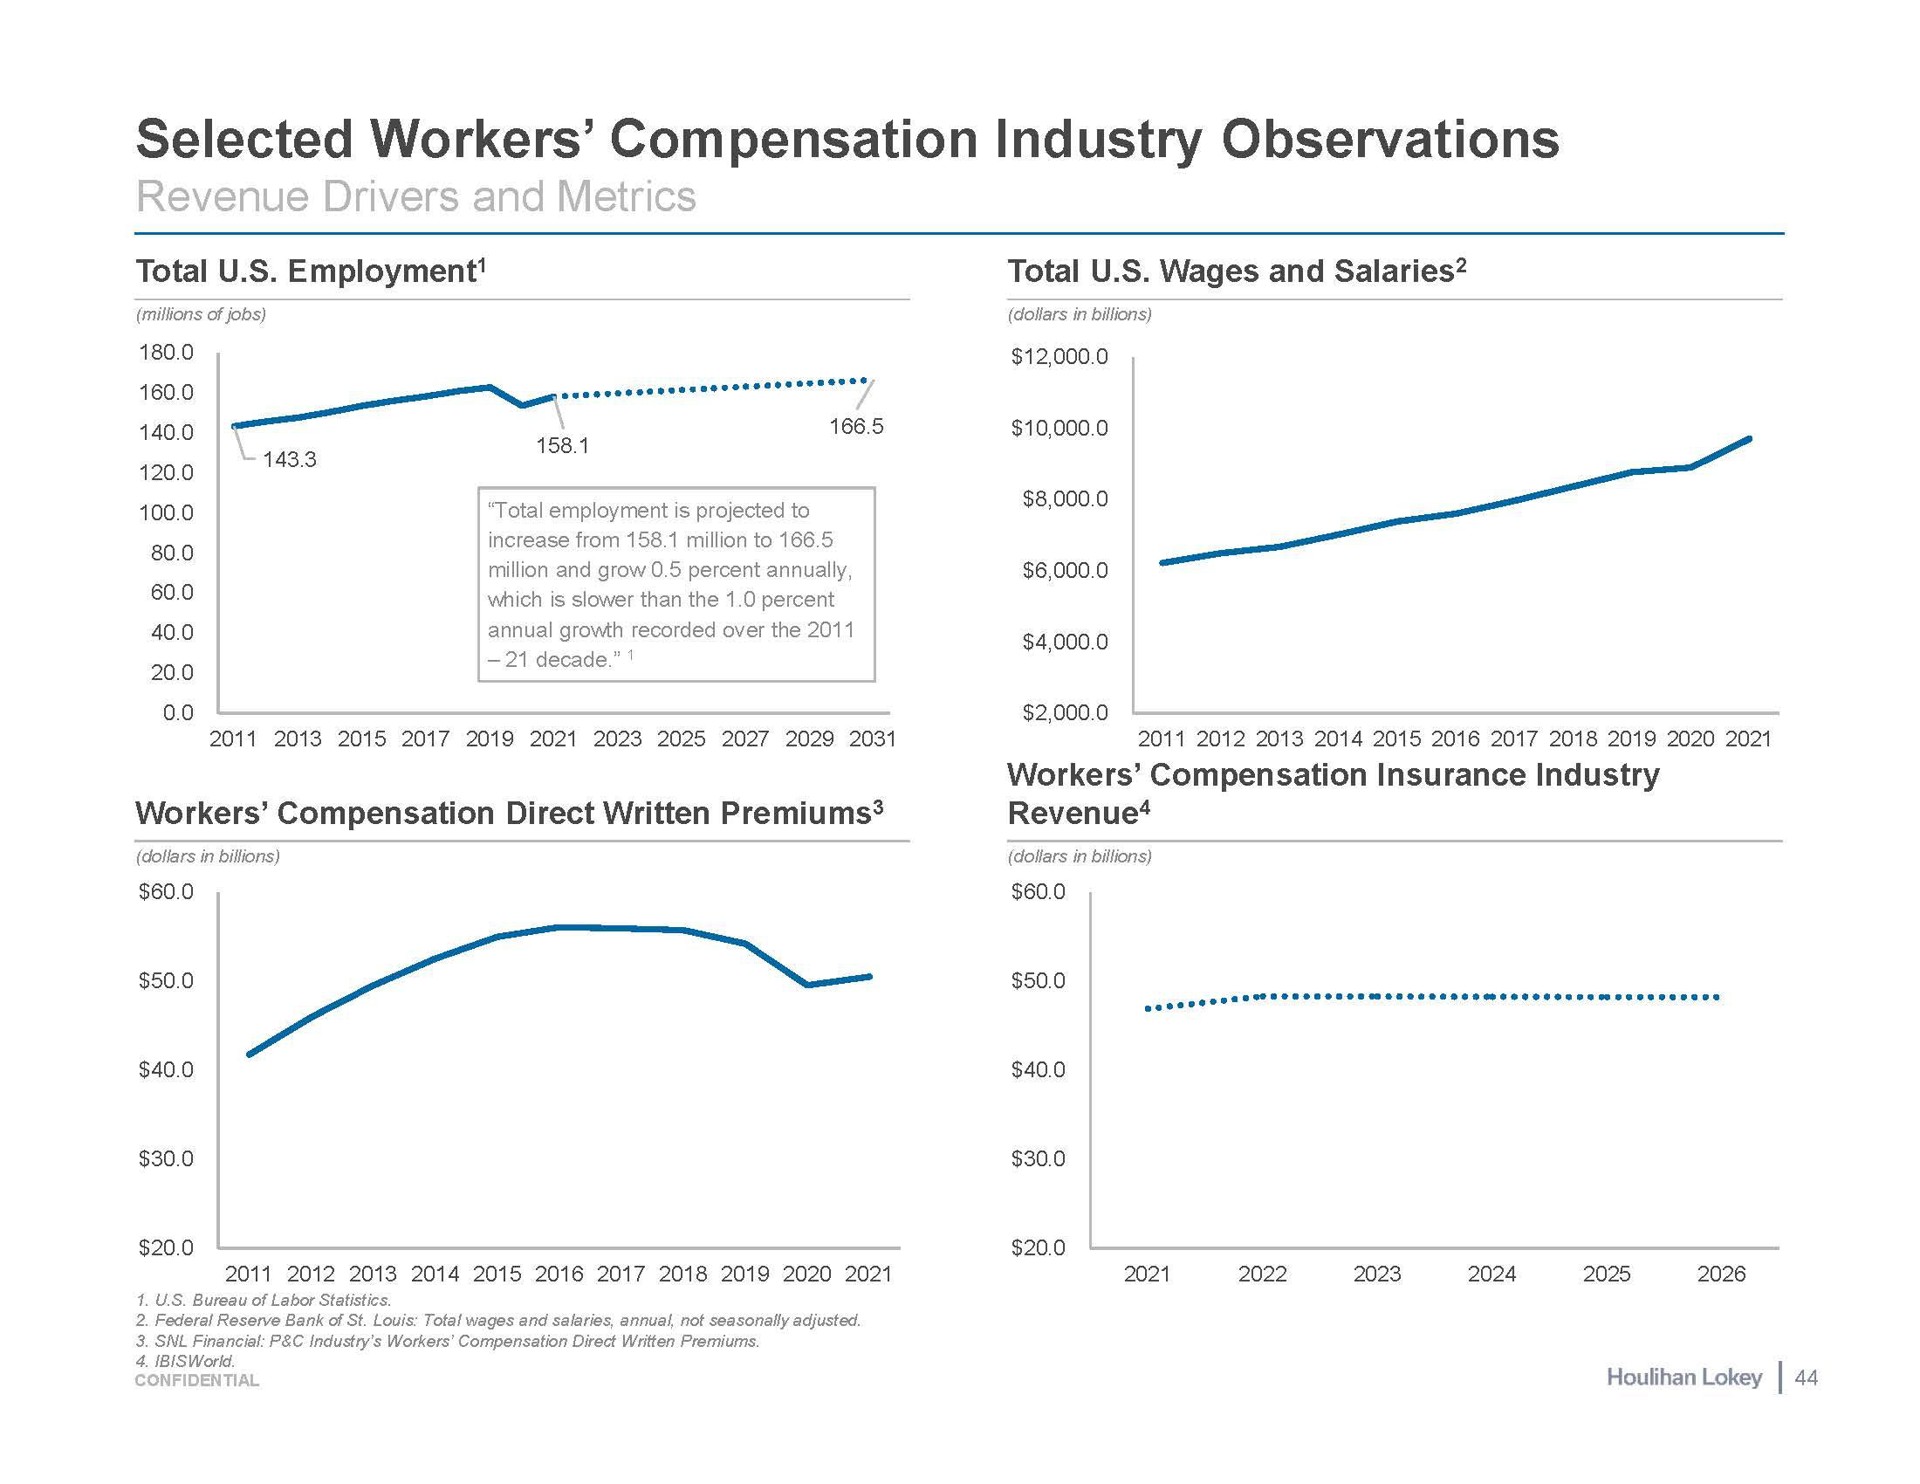 selected workers compensation industry observations total wages and salaries total employment | Houlihan Lokey